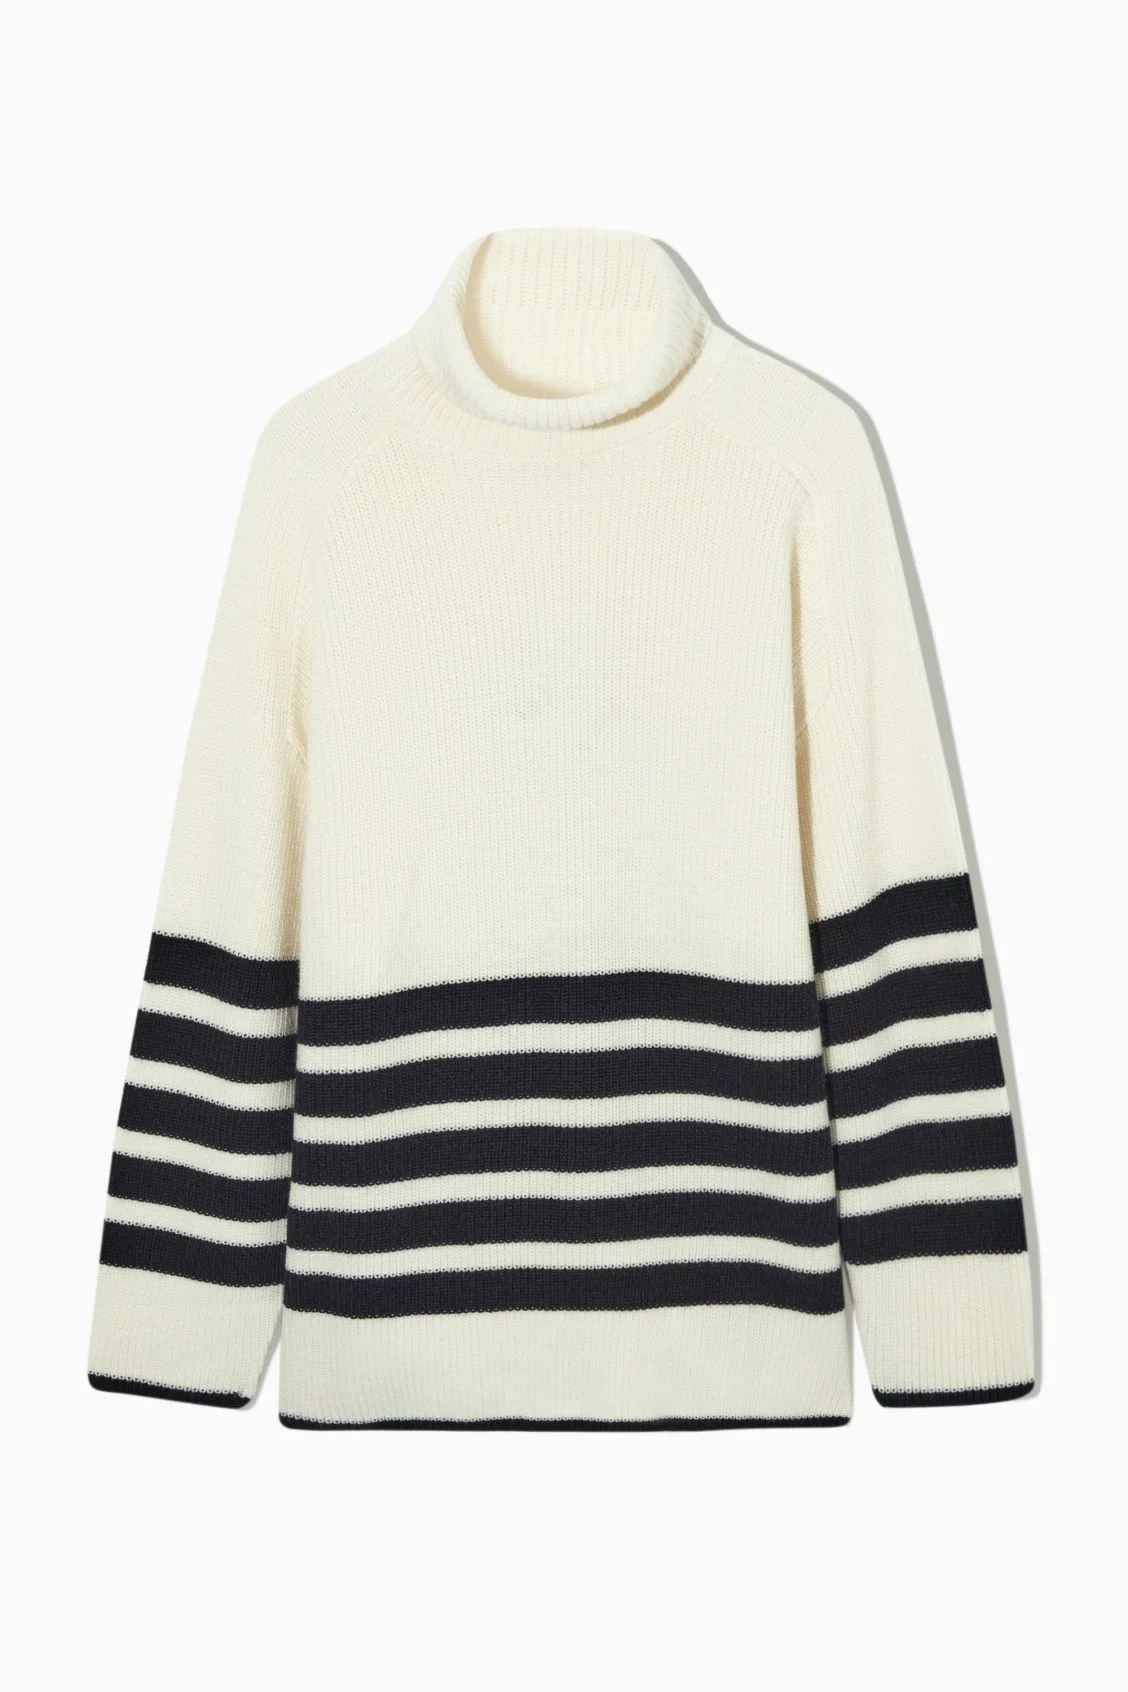 Skip the Dry Cleaner With These 6 Luxe, Washable Sweaters | Well+Good